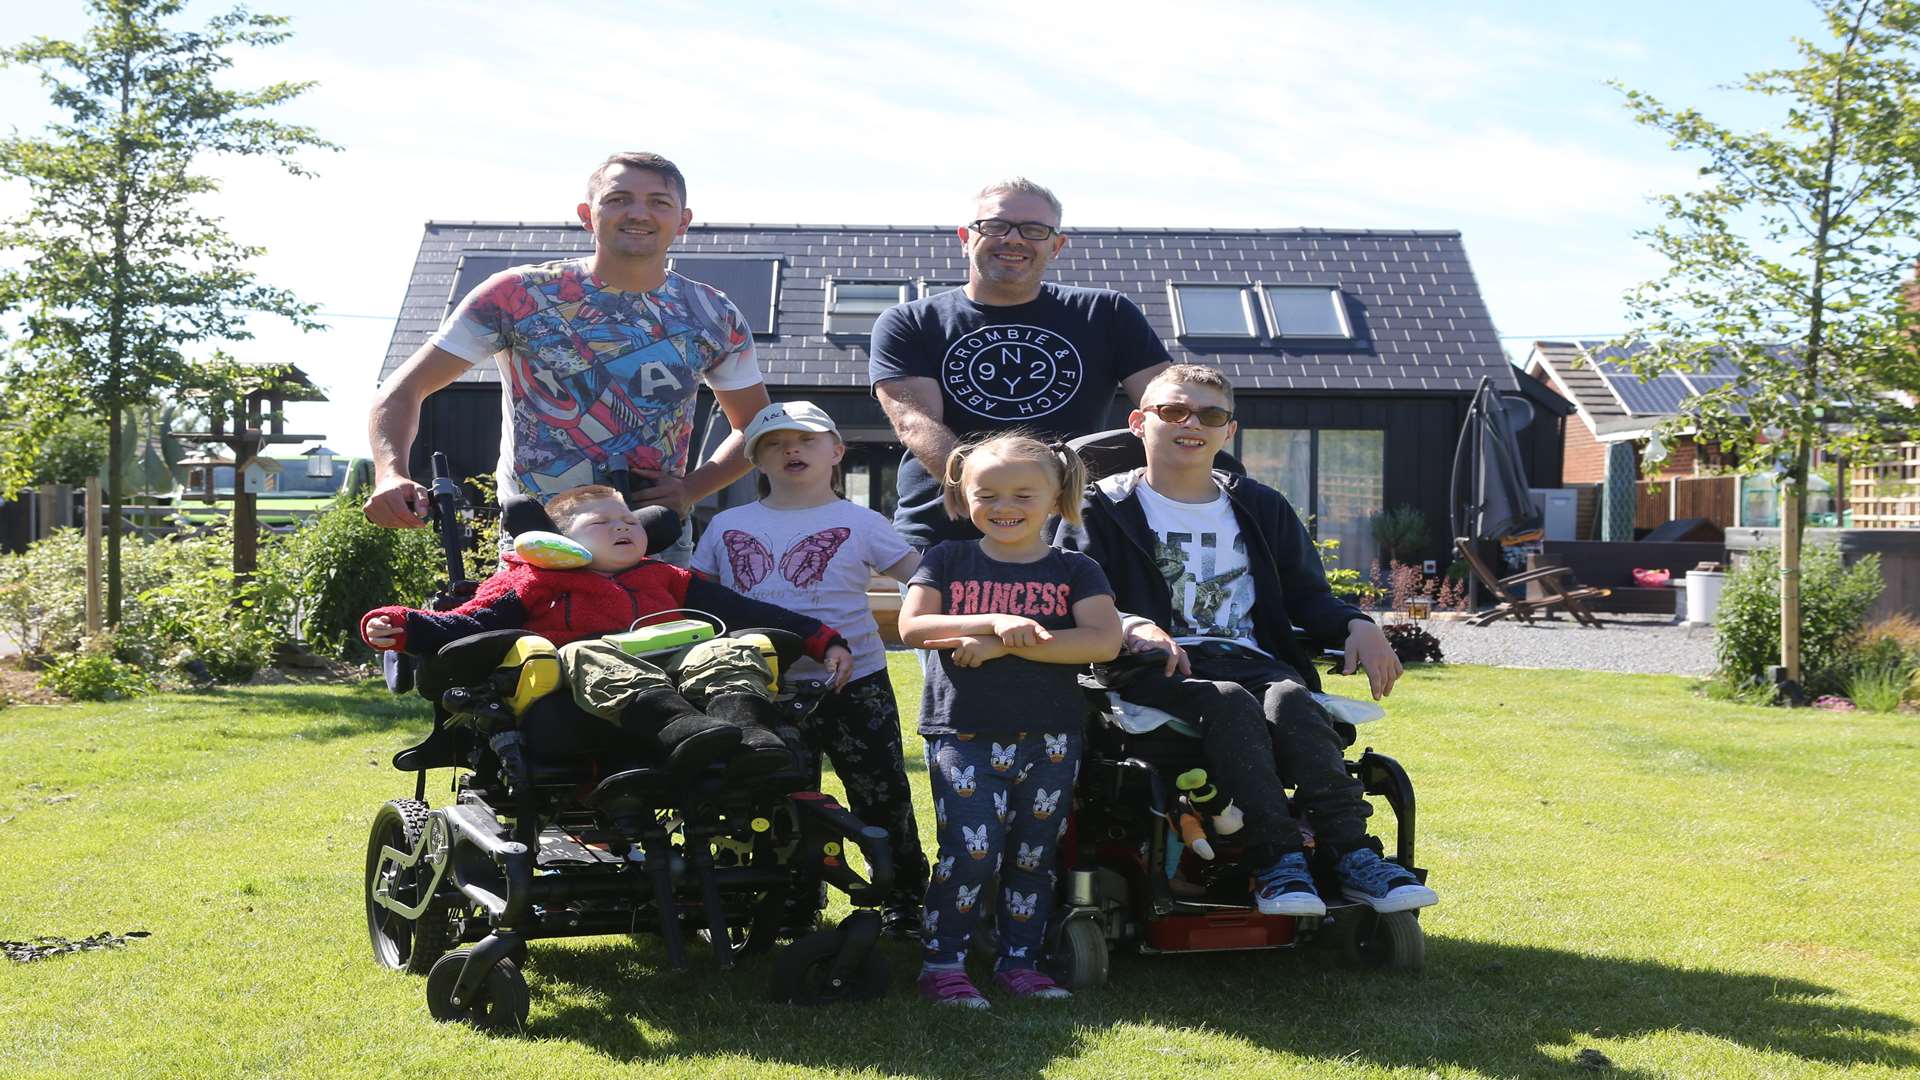 Kyle and Garry Ratcliffe with their children Curtis, Bella, Phoebe and Haydn in their garden of the home DIY SOS built